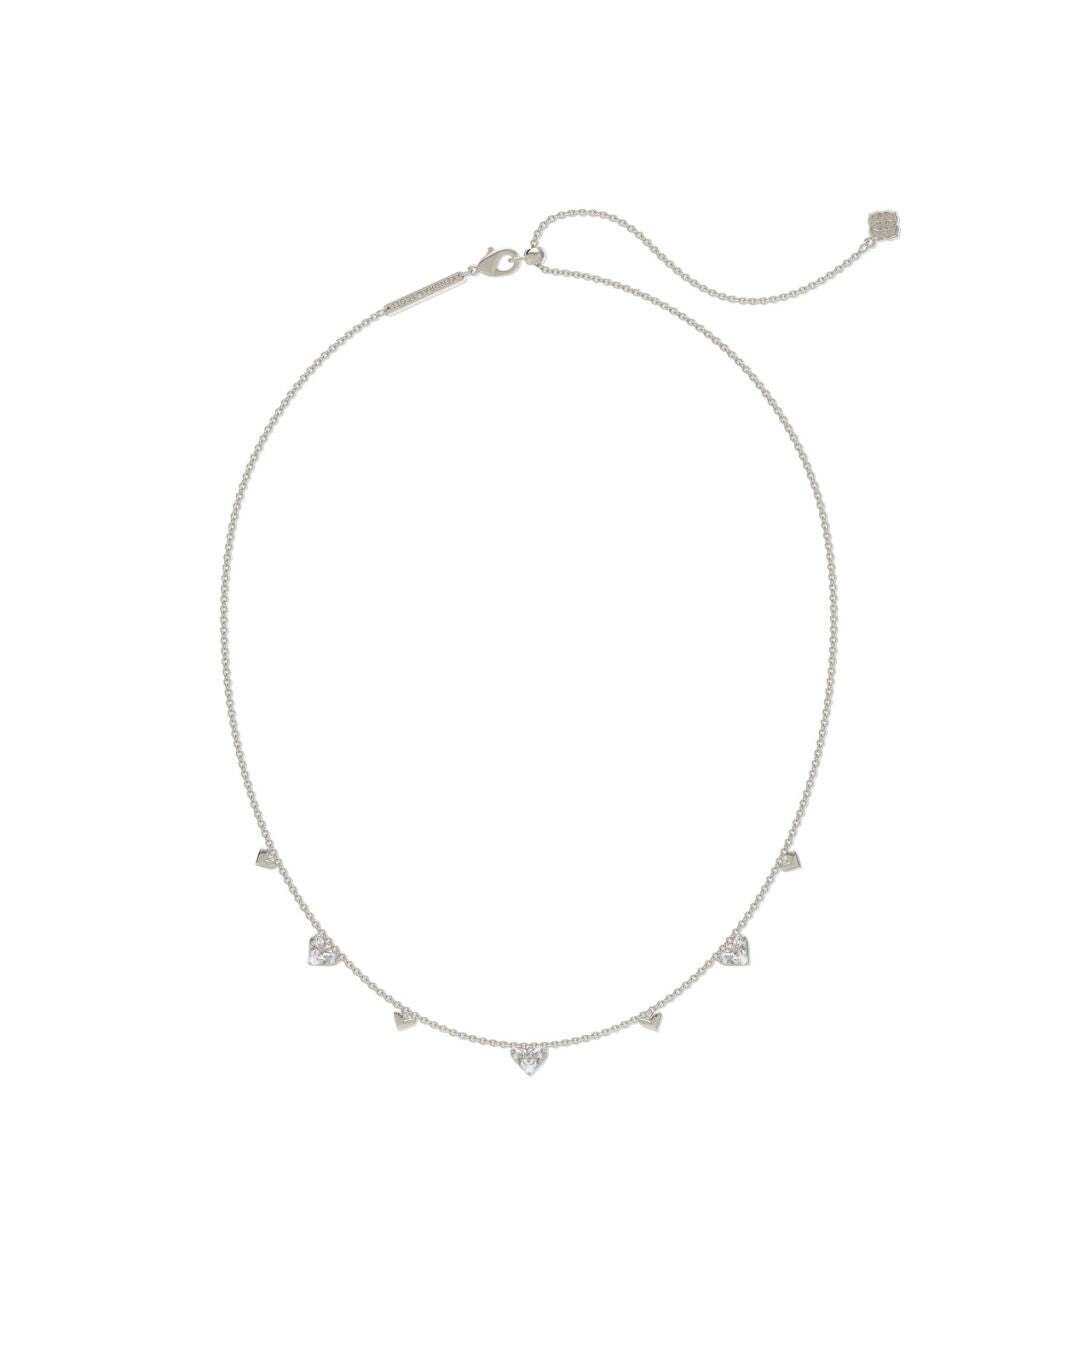 Haven Heart Crystal Choker Necklace Silver White Cz